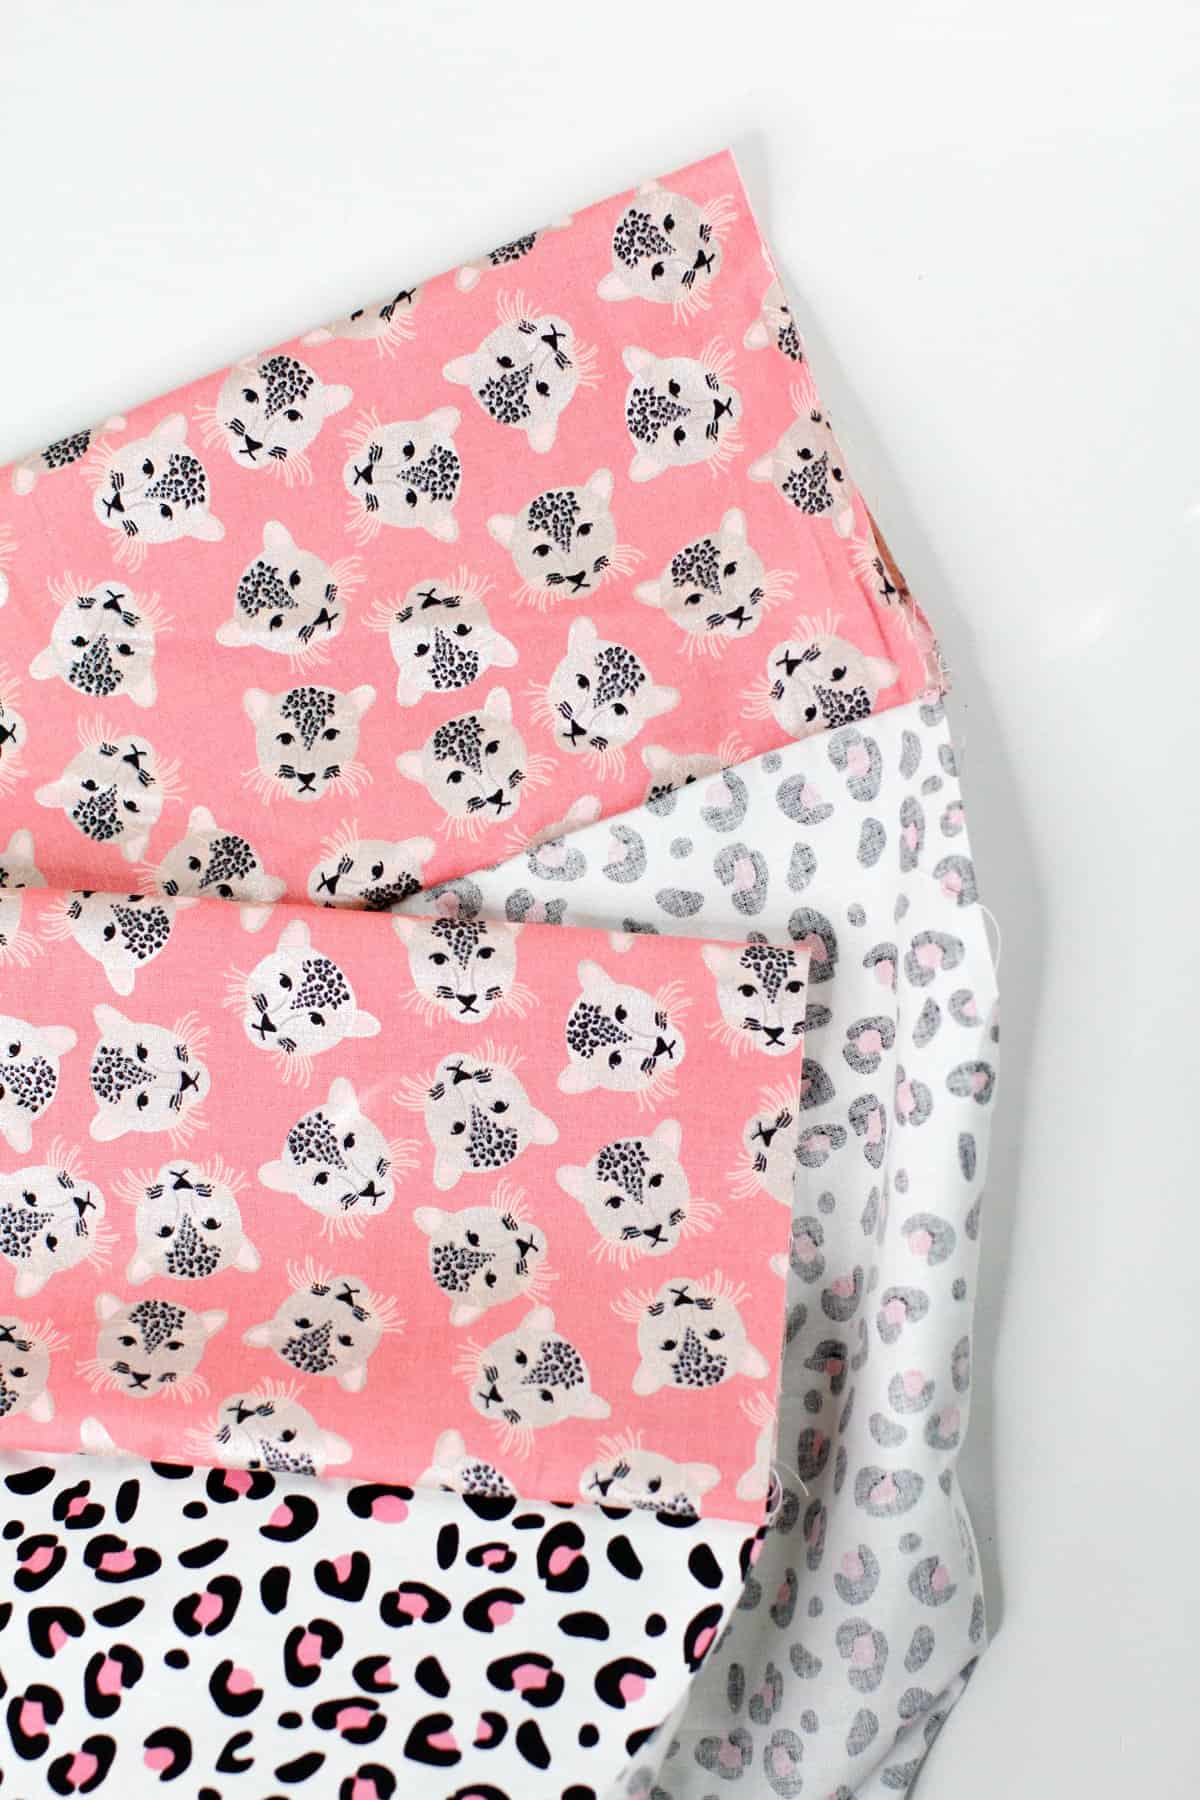 Pillowcase Sewing Pattern with the Burrito Method